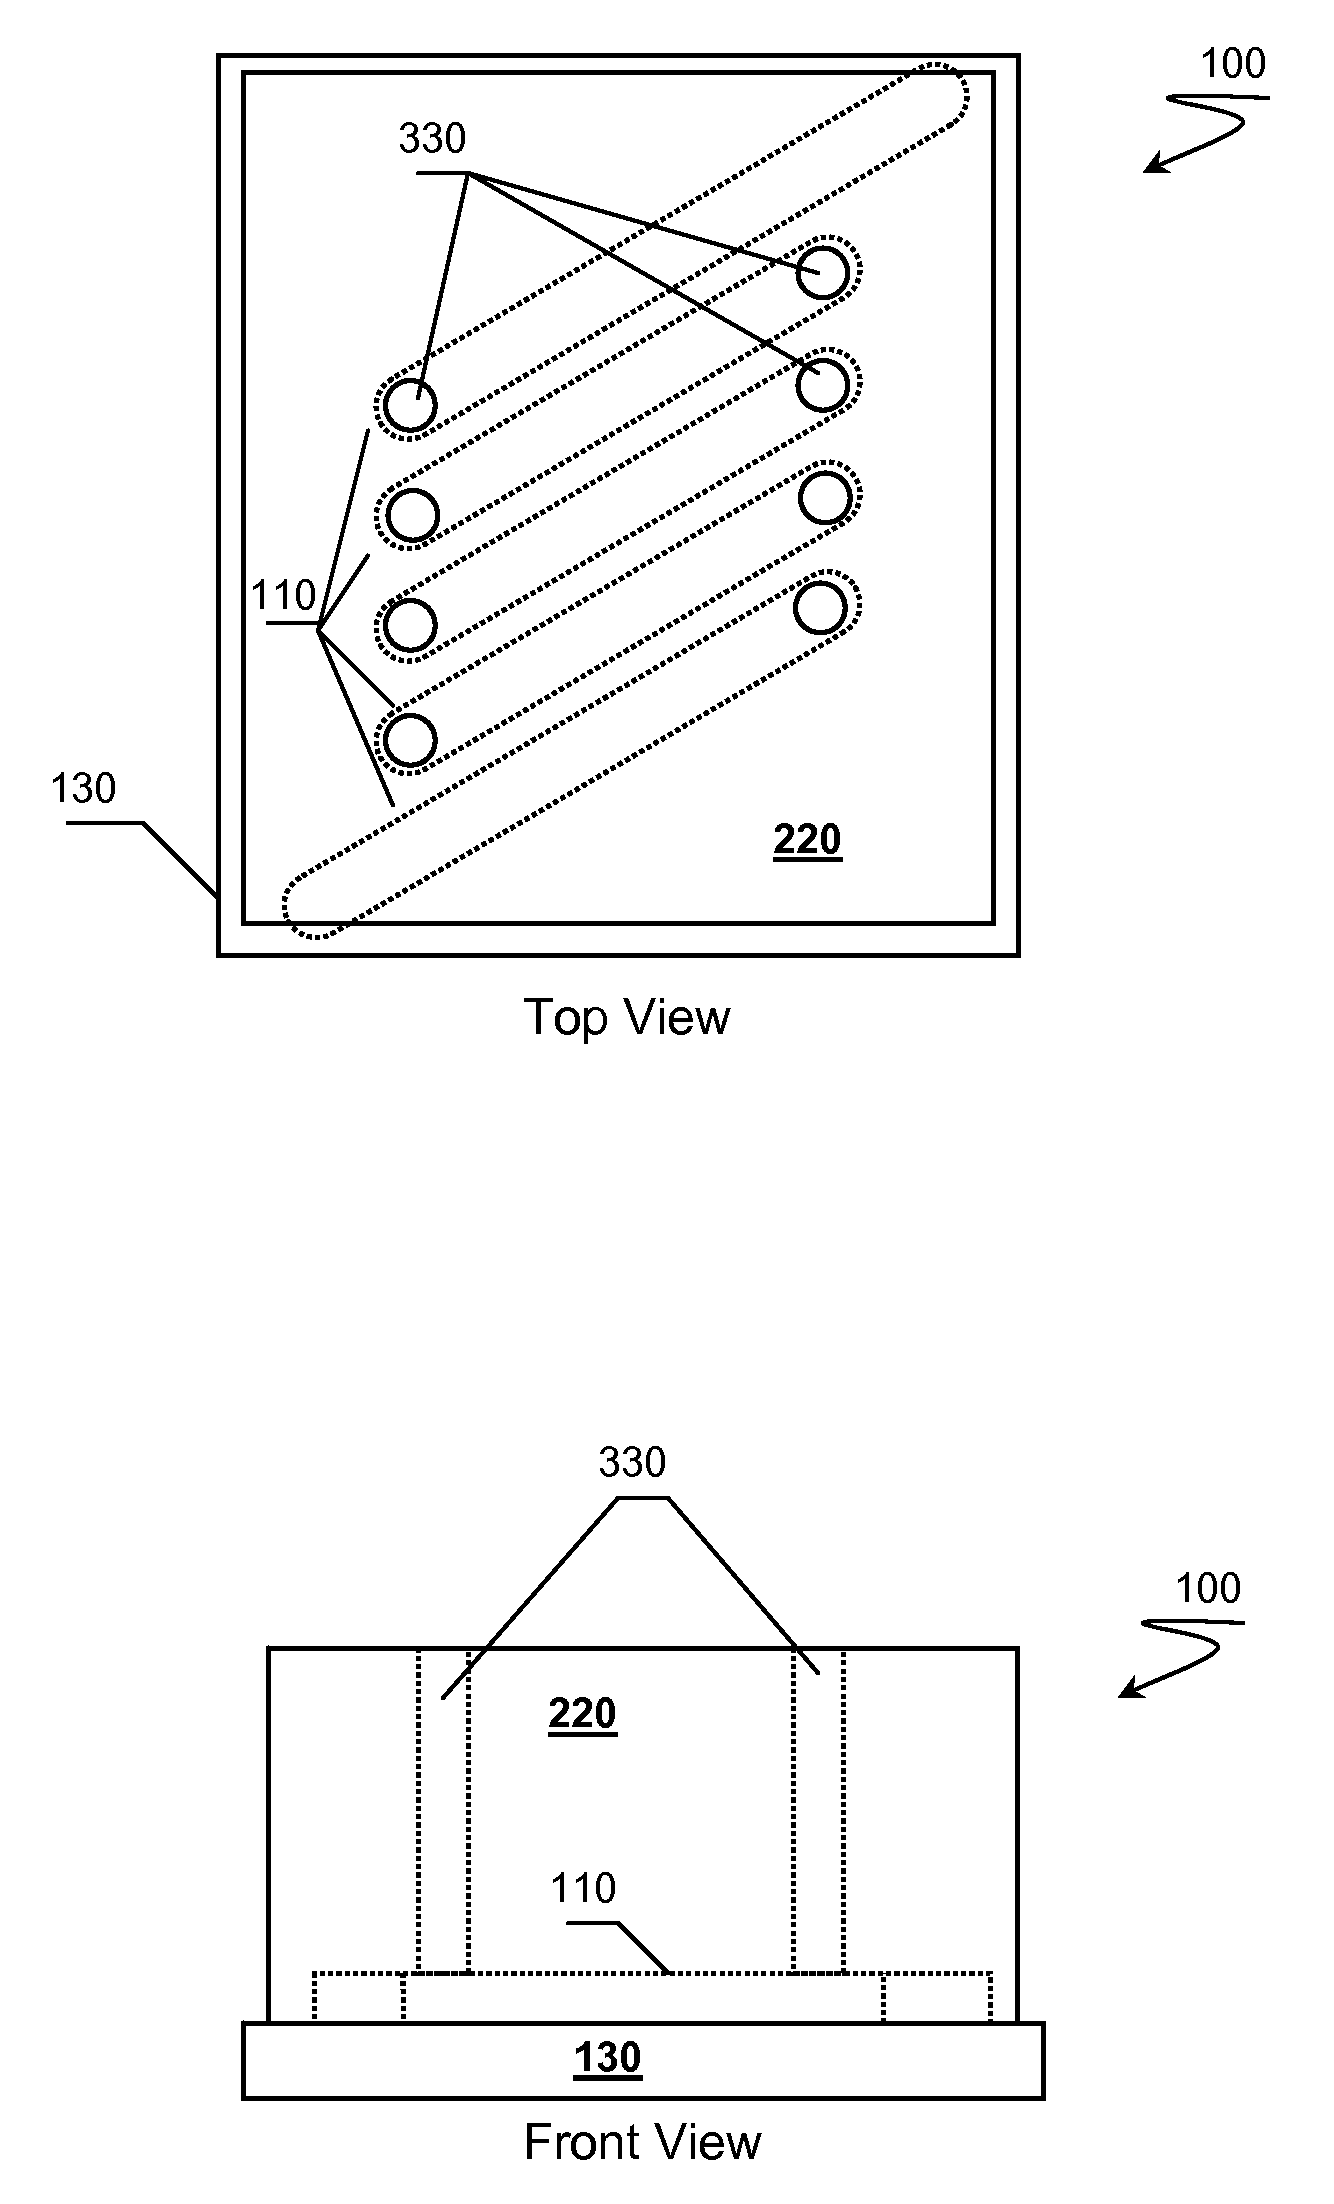 Solid State Components Having an Air Core